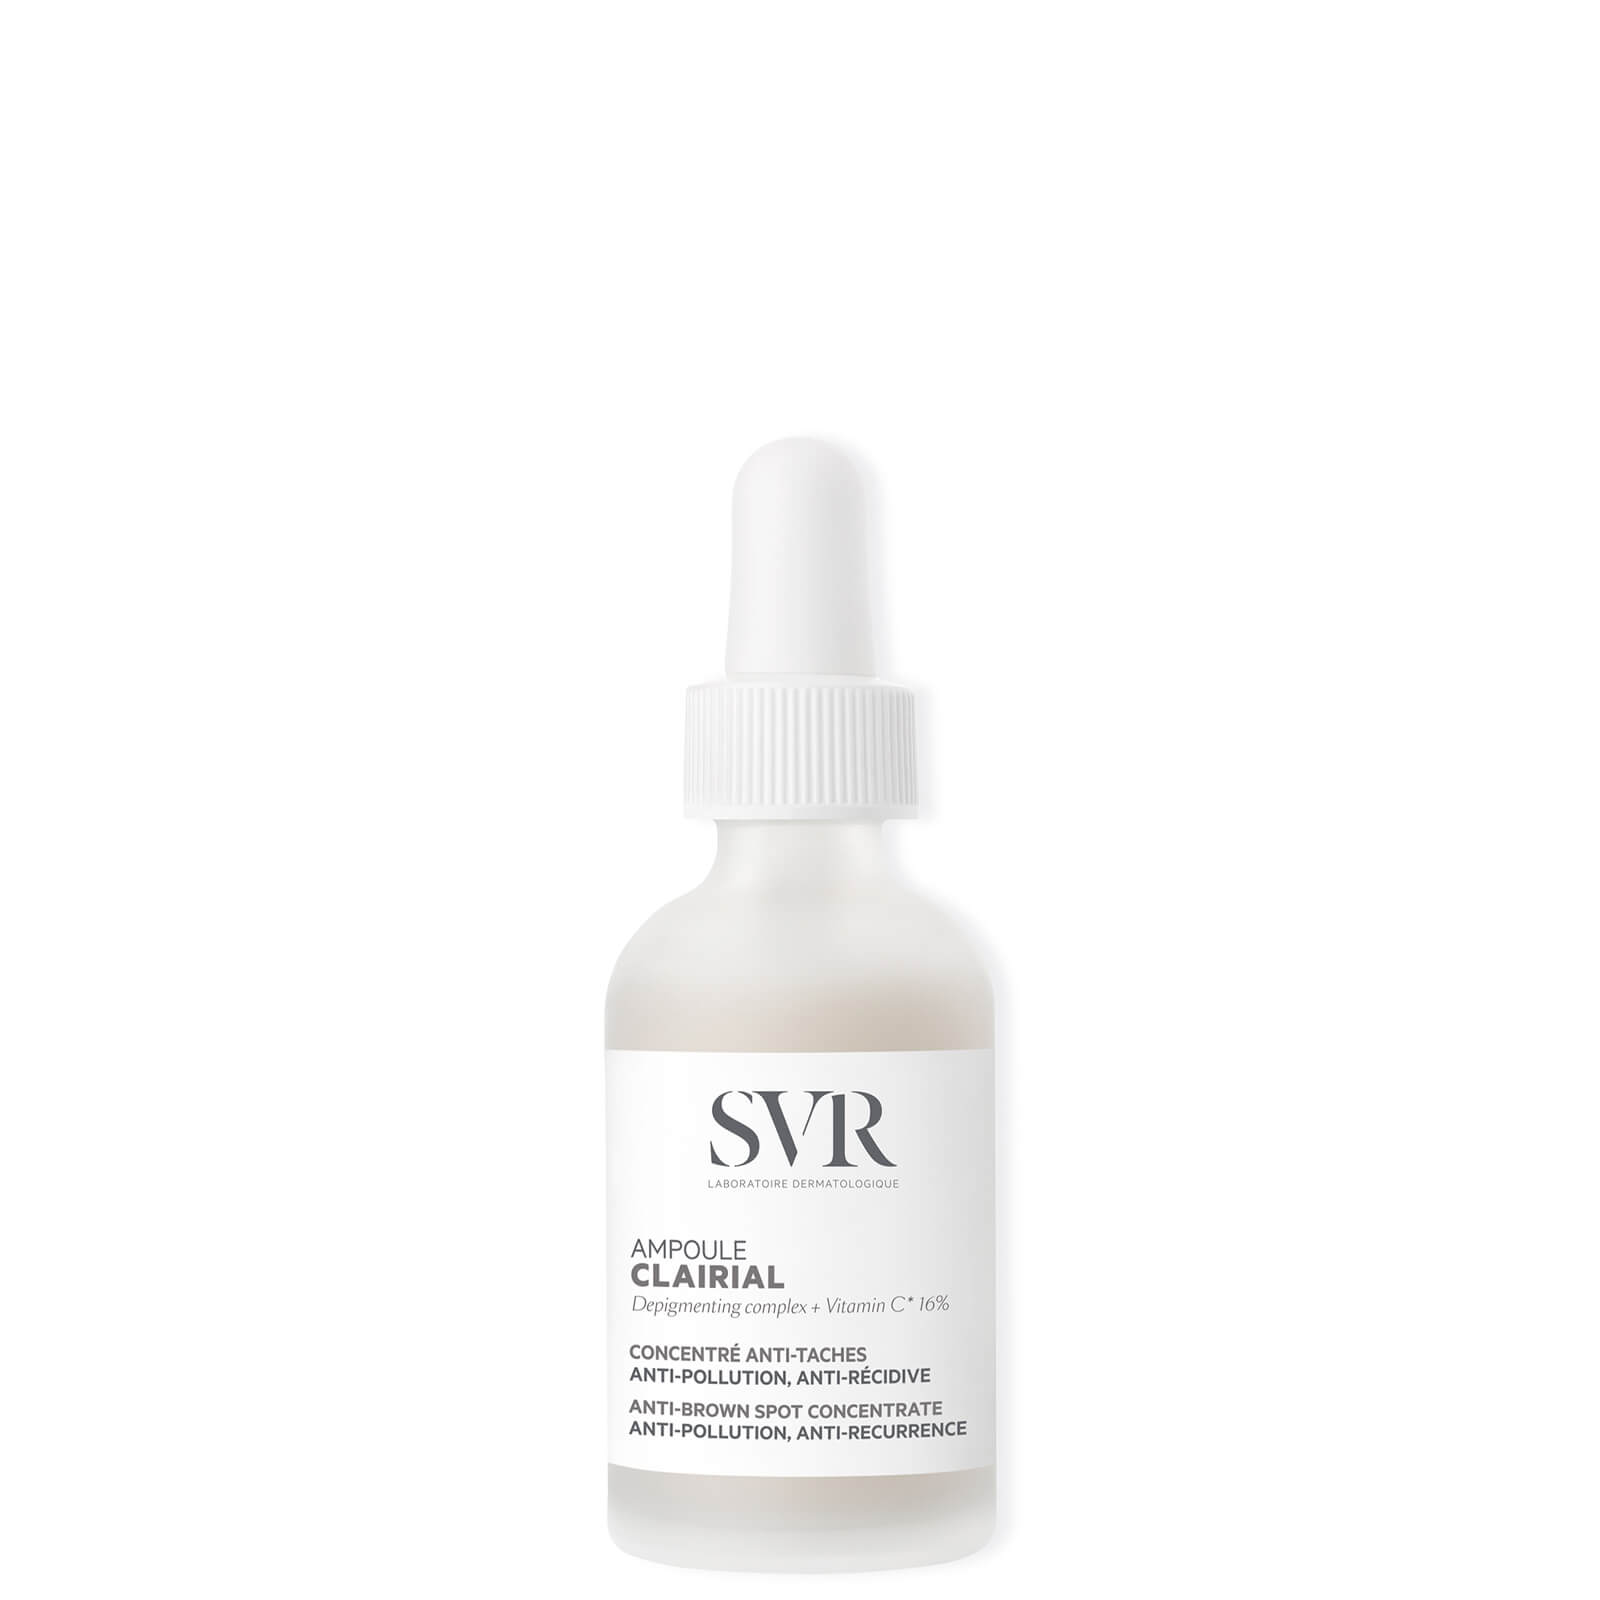 Photos - Cream / Lotion SVR CLAIRIAL Ampoule Hyperpigmentation and Brown Spots 30ml 1011A16